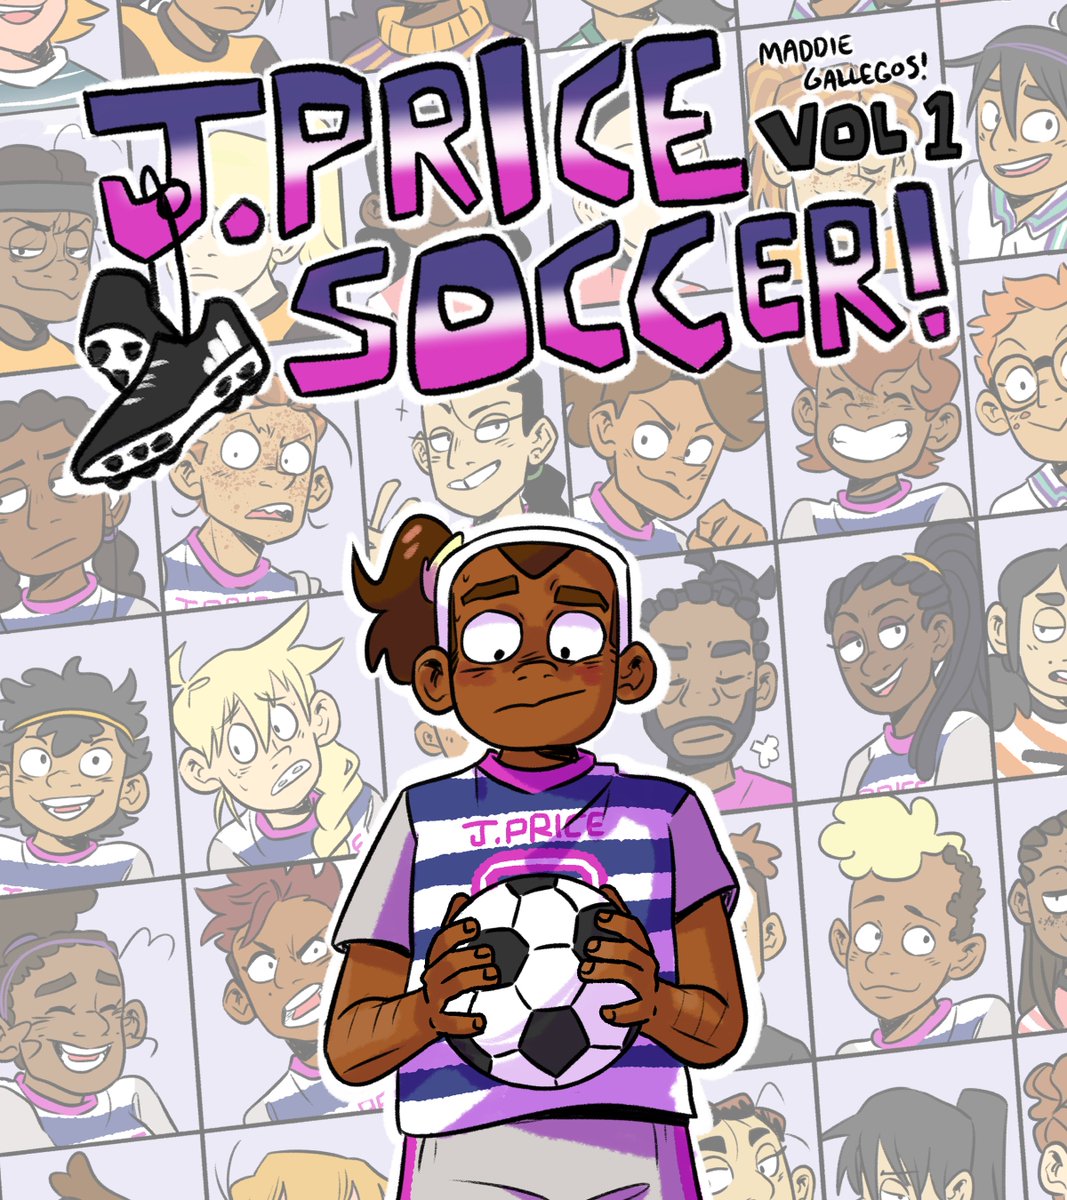 Maddie @  http://maddiegallegos.com  ig/twitter: soupthegJ. Price Soccer is an LGBT girls sports comic that follows a five foot tall goalie who can't touch the crossbar. It's friendship, soccer and learning how to accept yourself for all the things you're not!